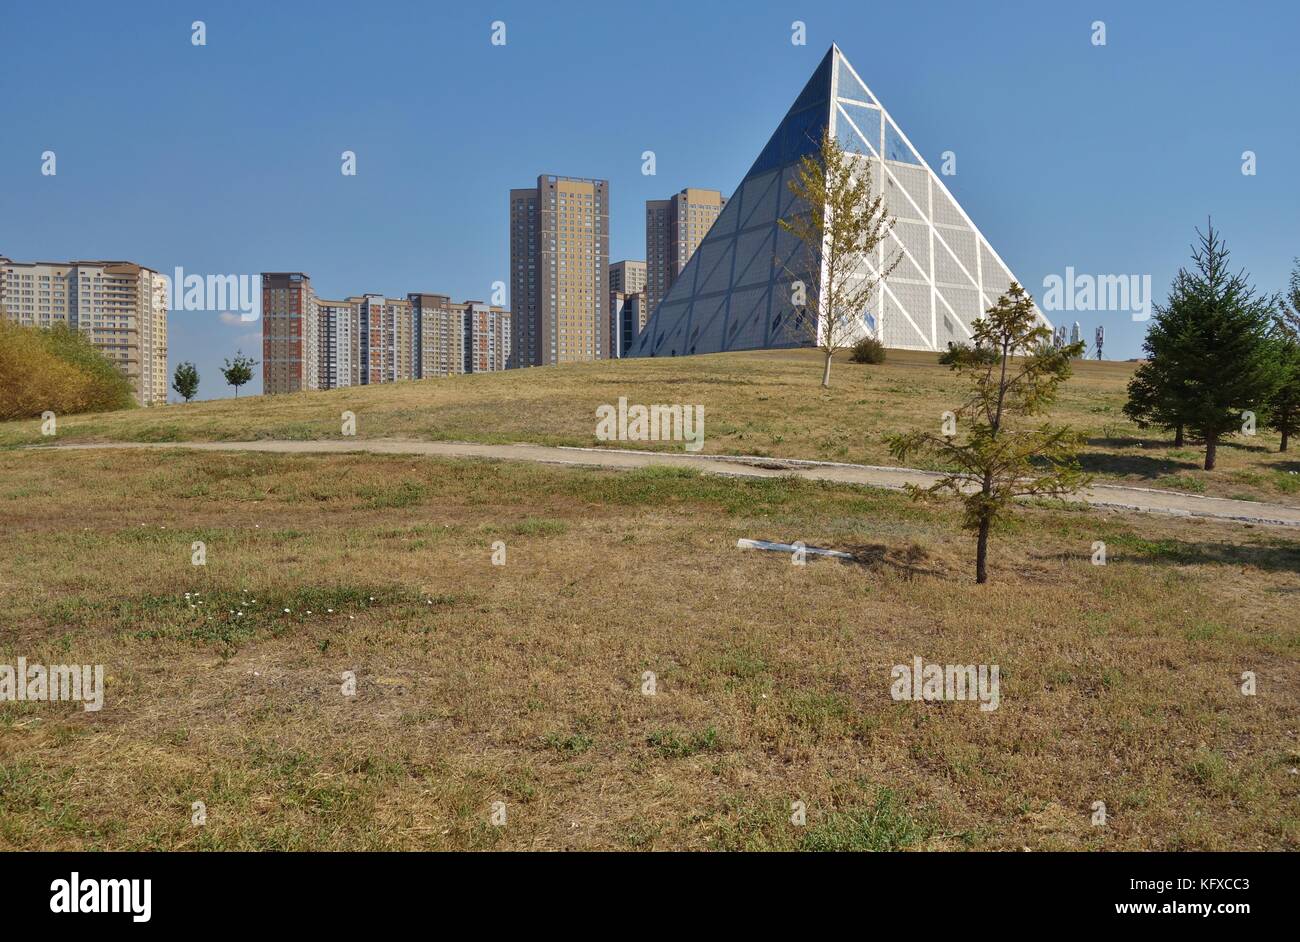 The Palace of Peace and Reconciliation (Pyramid of Peace and Accord) is a pyramid structure designed by British architects Foster and Partners Stock Photo